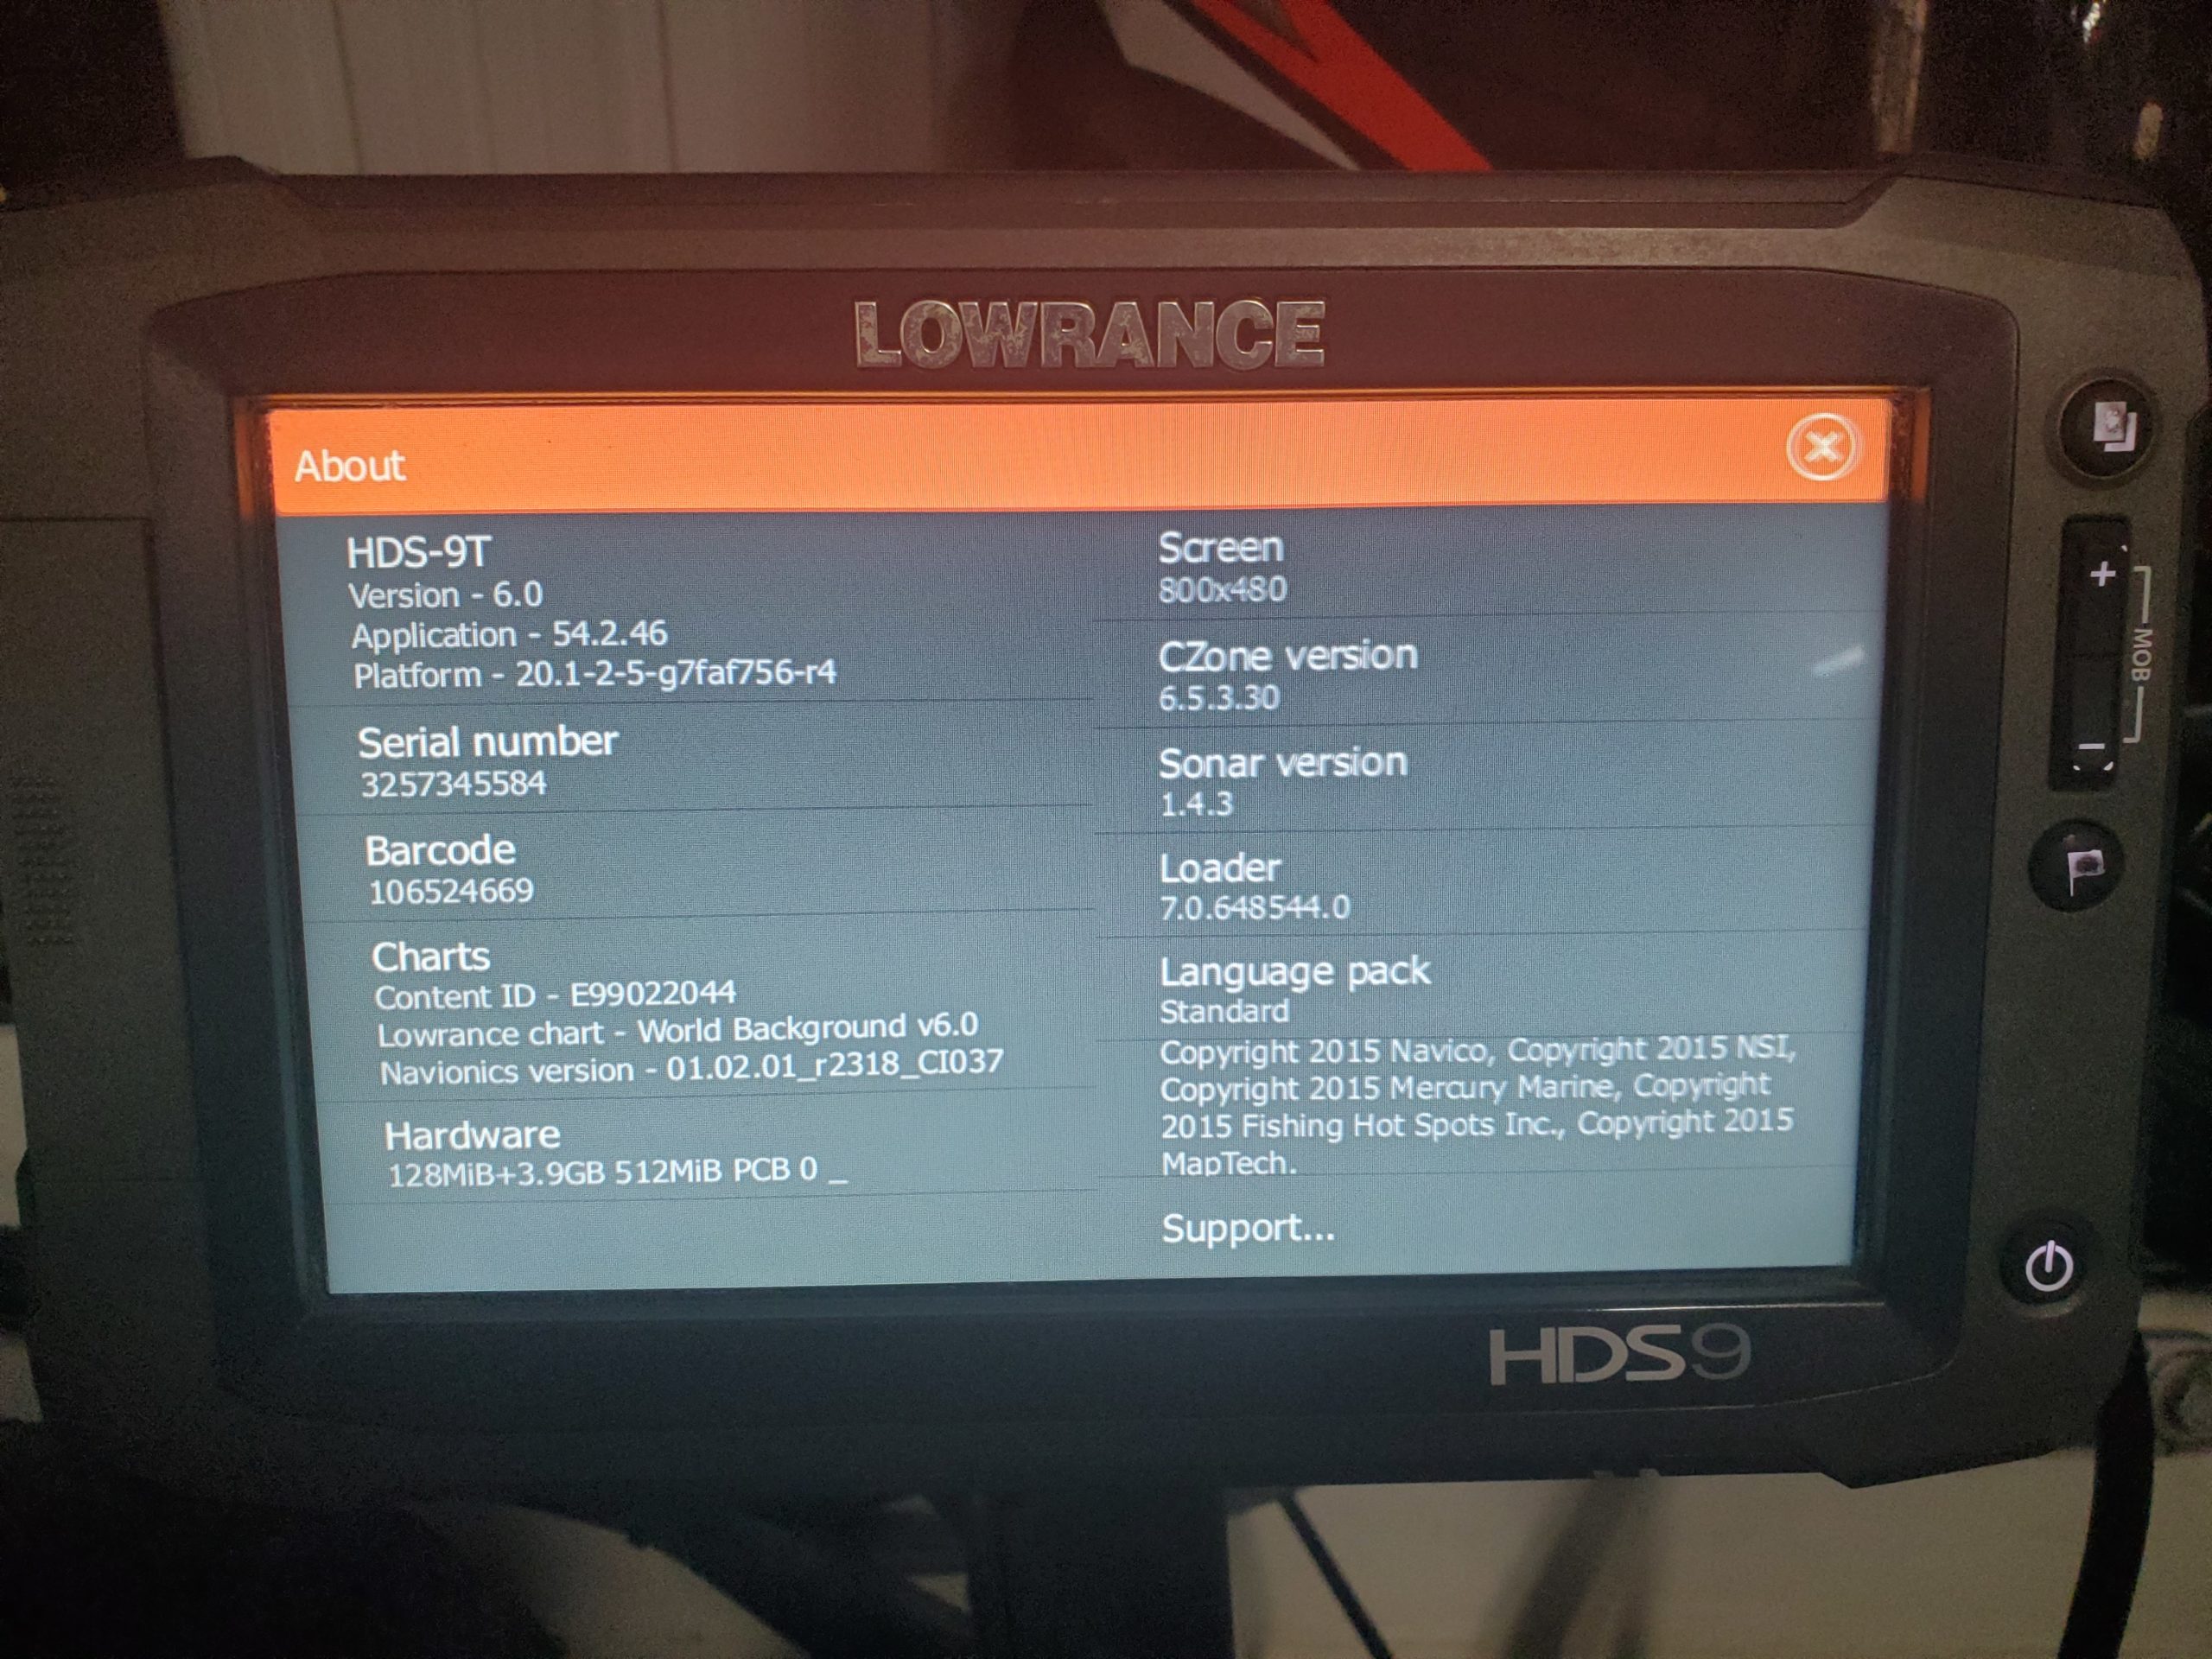 For Sale: Lowrance HDS 9 Gen 2 Touch with extras - Classified Ads